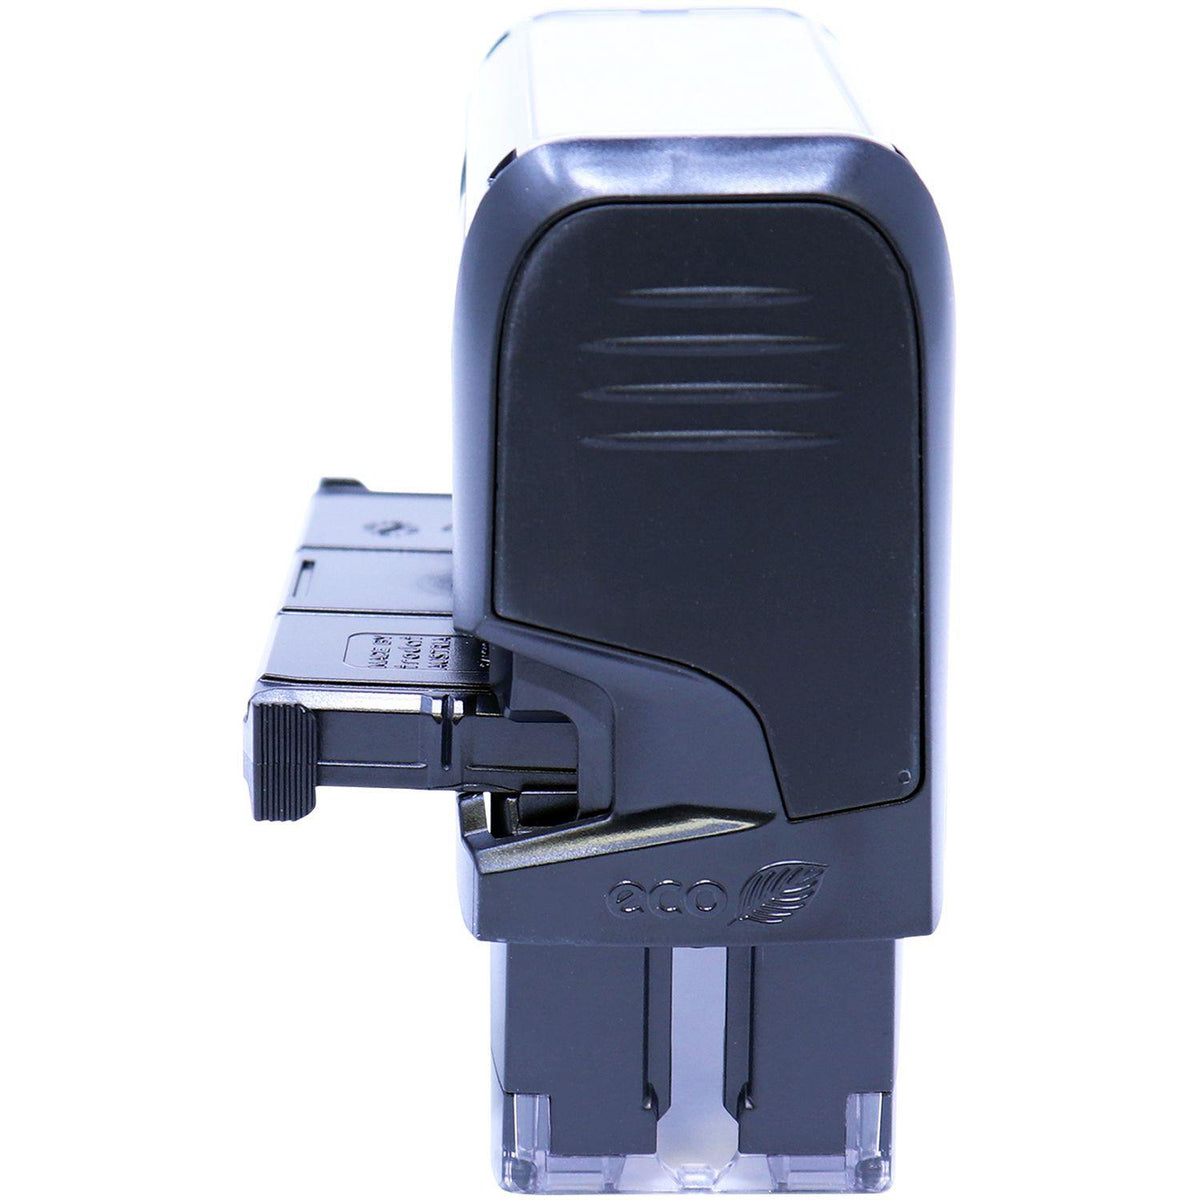 Self Inking Copy For Your Information Stamp - Engineer Seal Stamps - Brand_Trodat, Impression Size_Small, Stamp Type_Self-Inking Stamp, Type of Use_Office